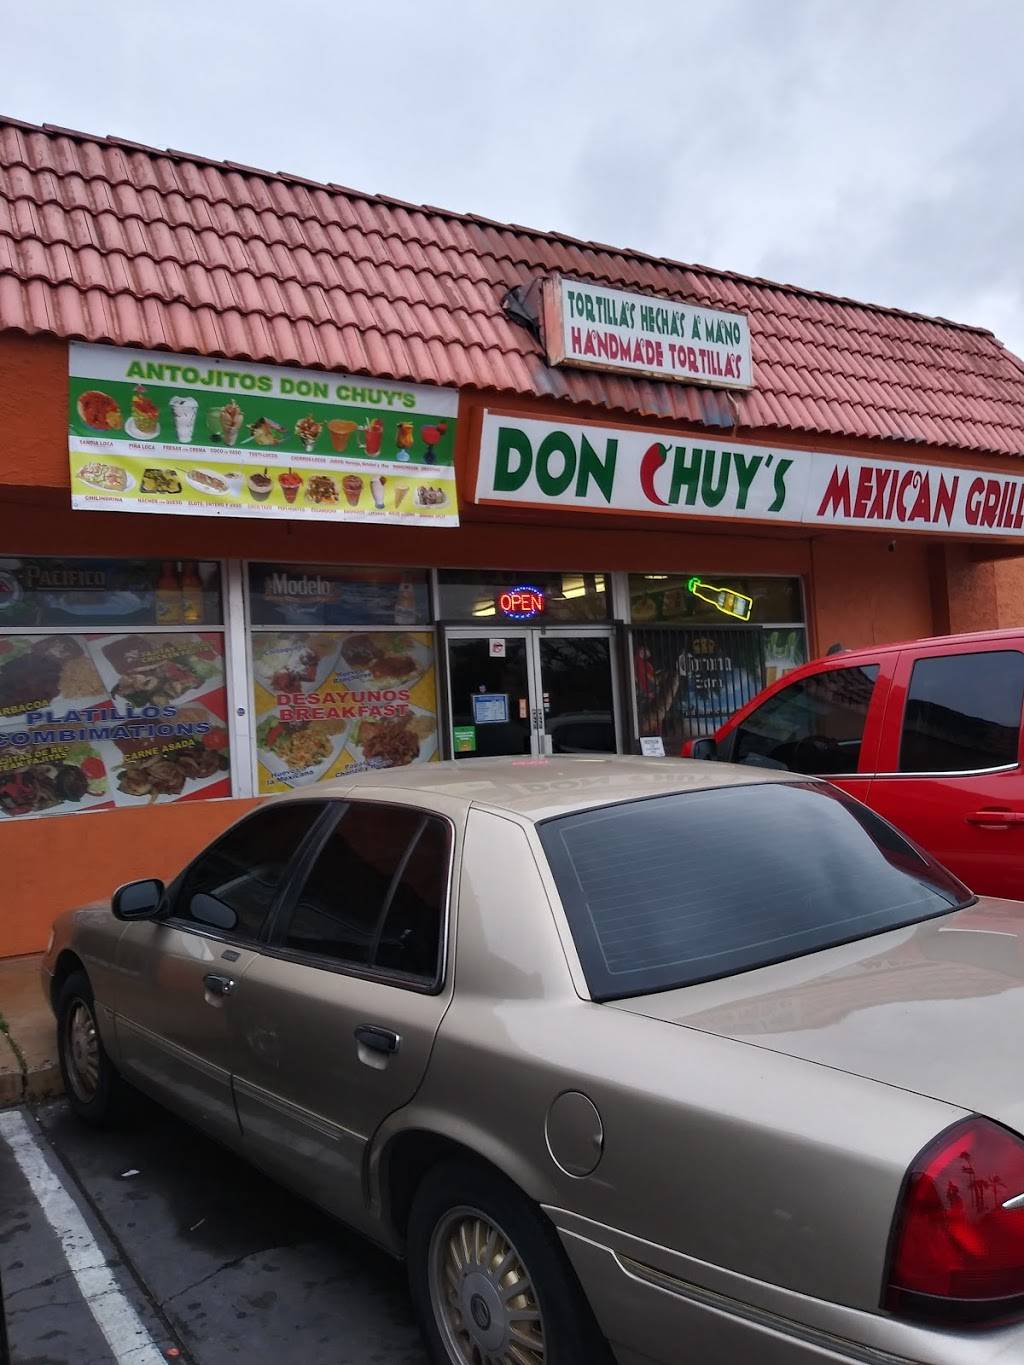 Don Chuys Mexican Grill | restaurant | 6403 N 59th Ave, Glendale, AZ 85301, USA | 6239399000 OR +1 623-939-9000